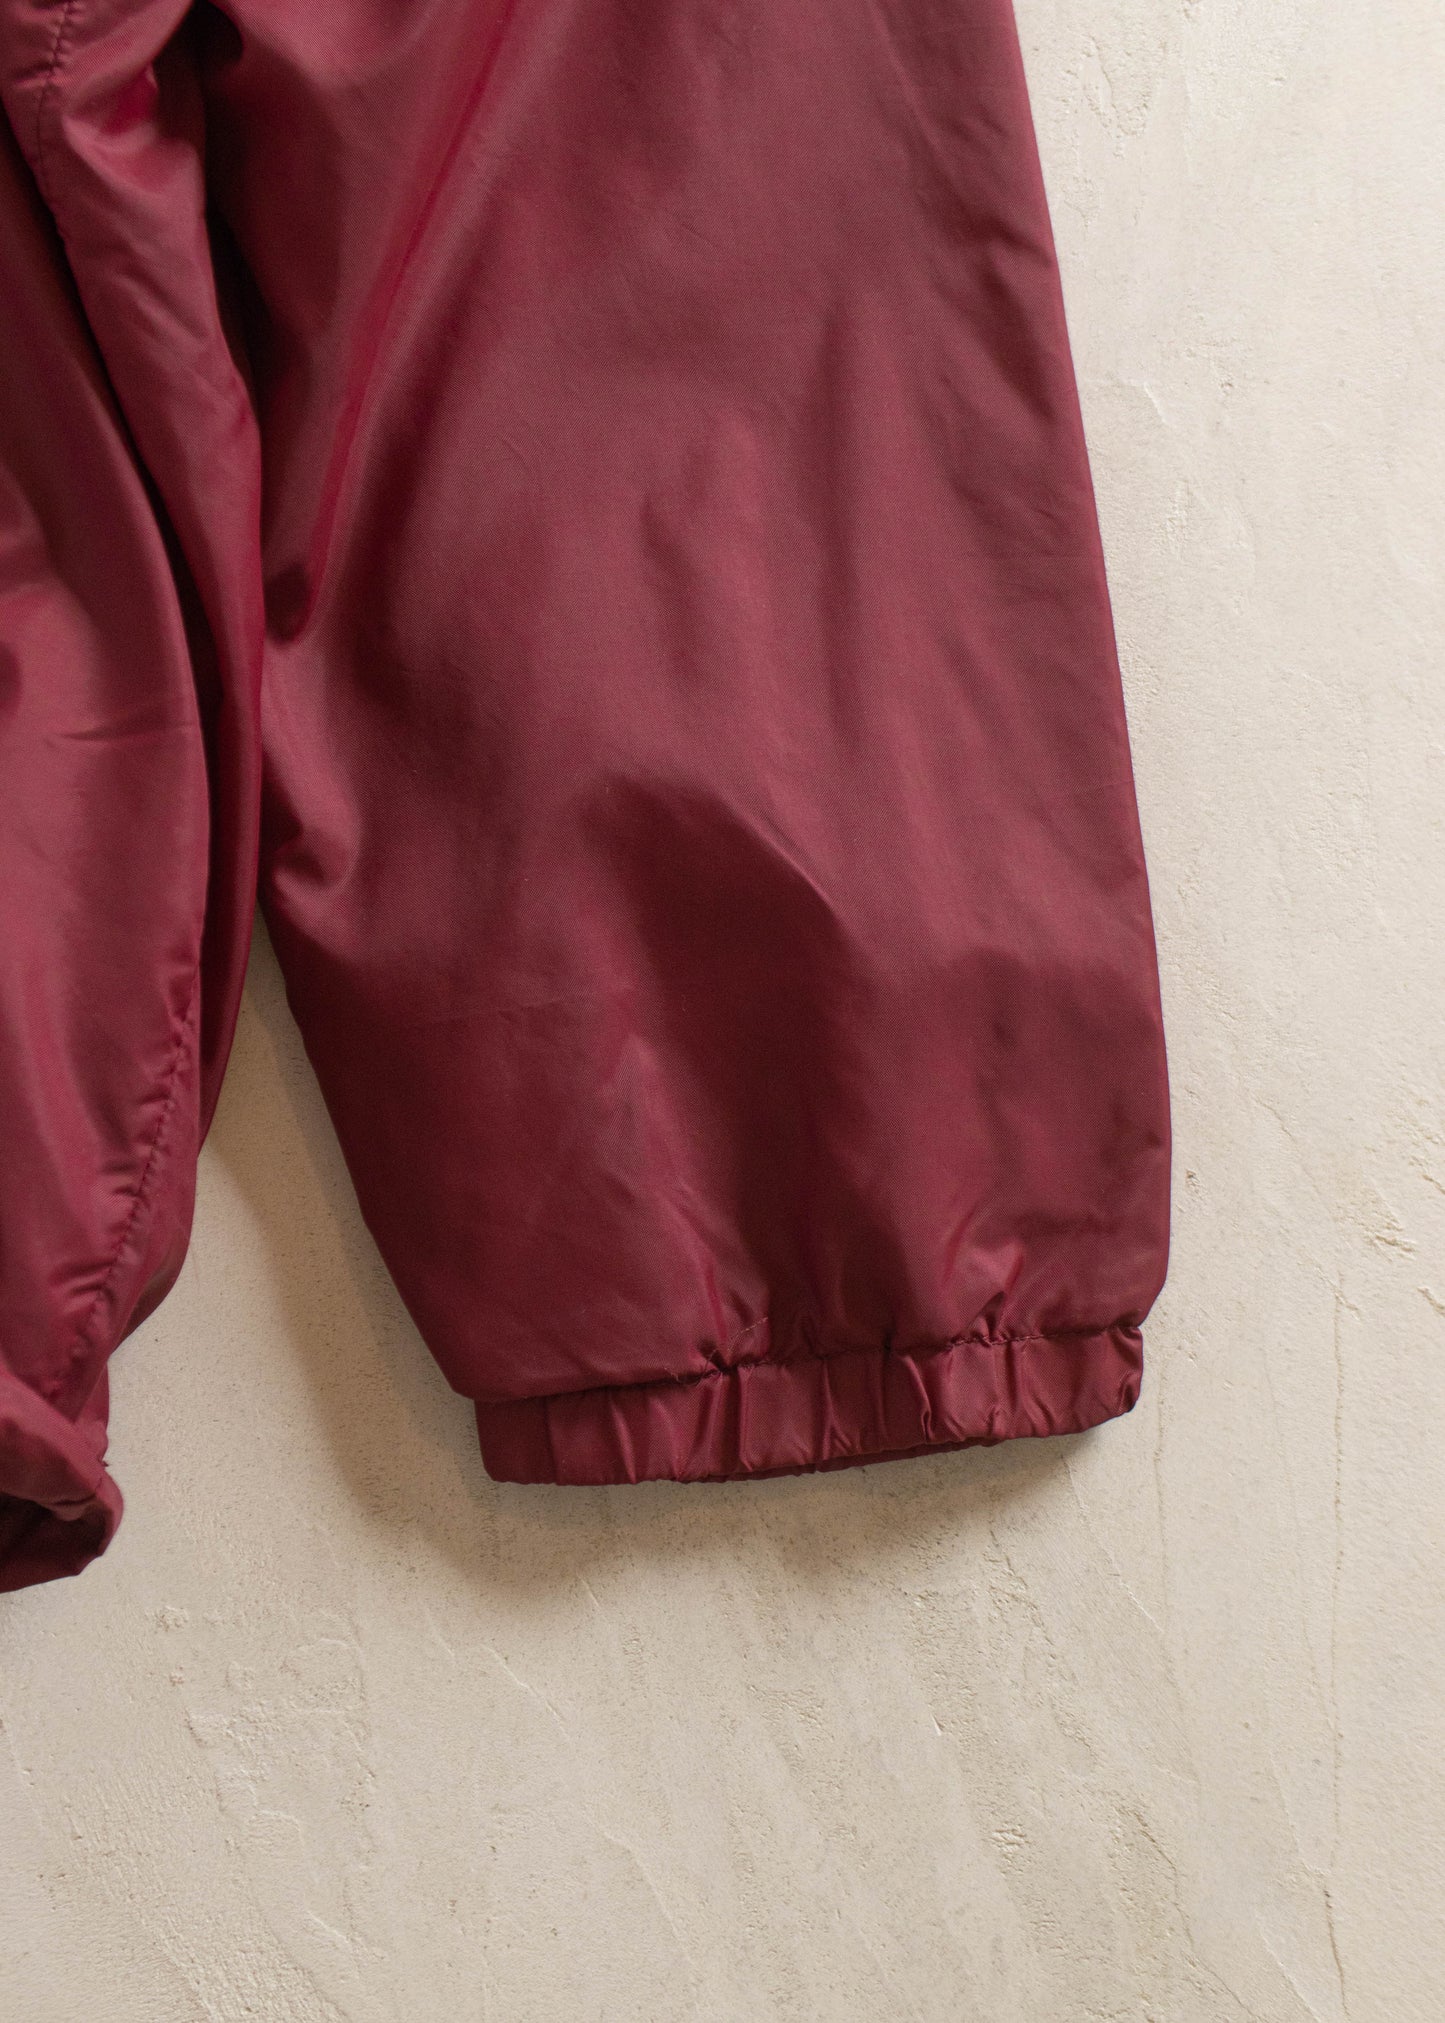 1980s Solid Burgundy Lined Nylon Jacket Size L/XL